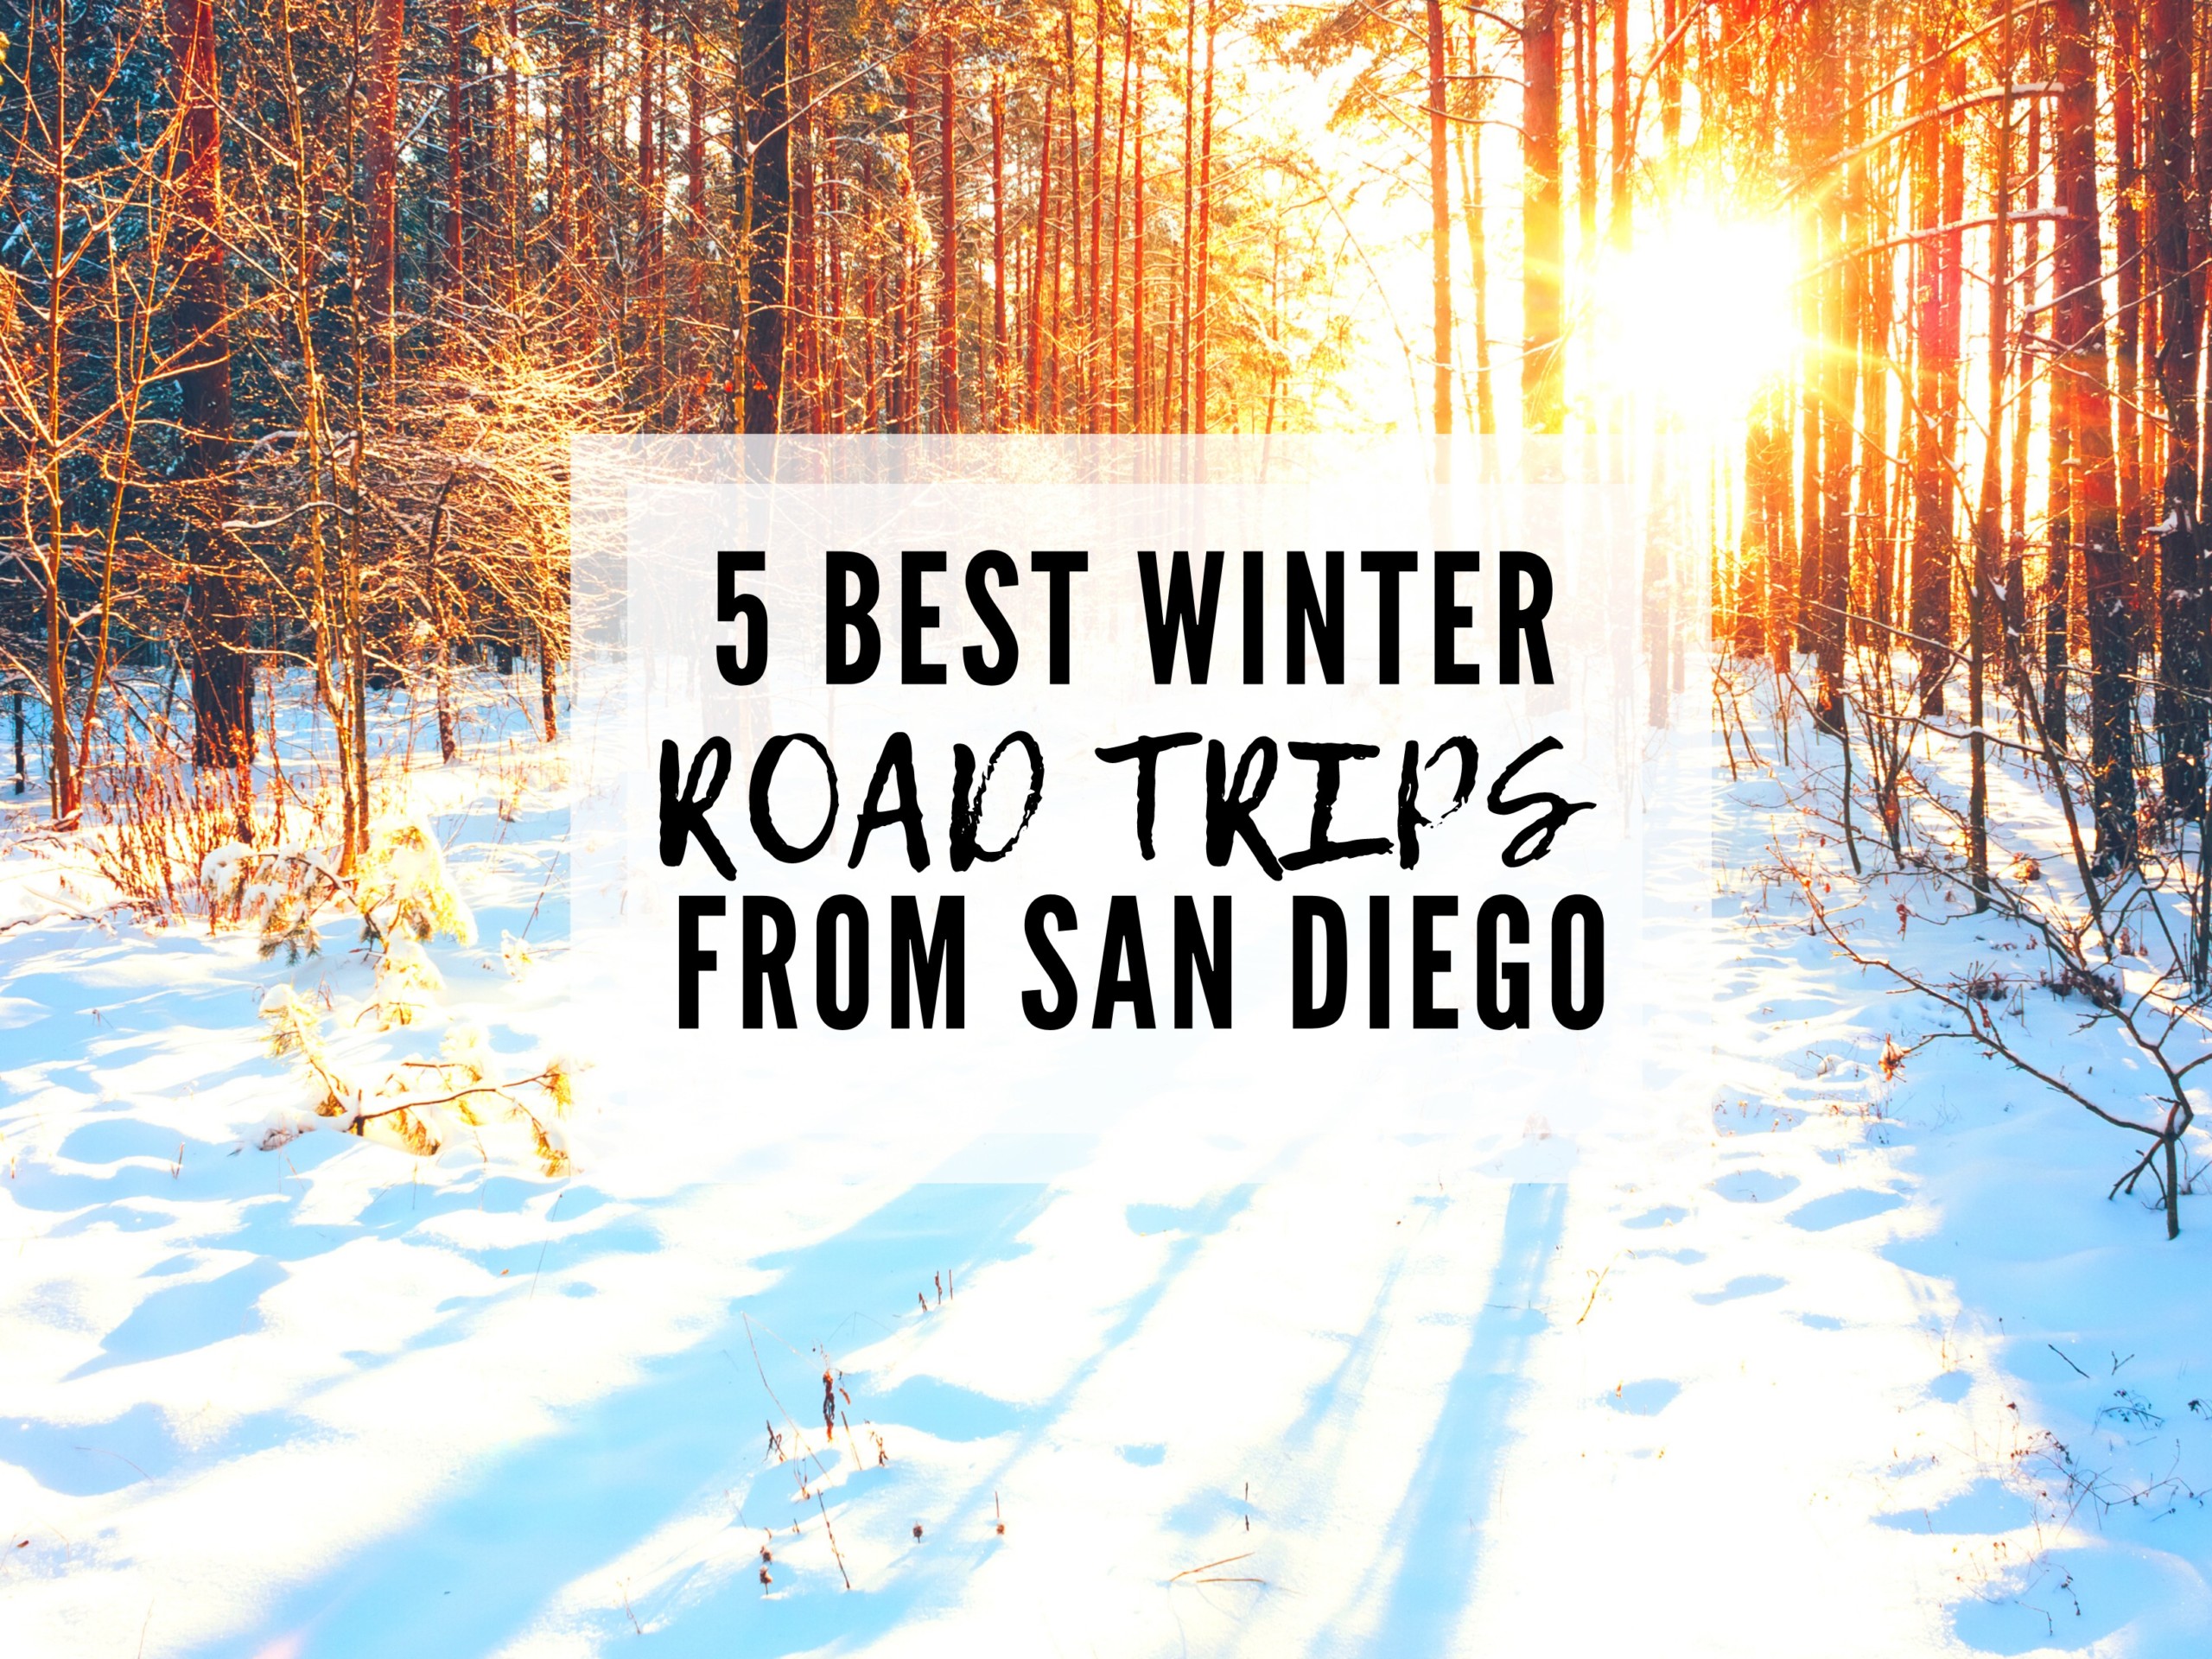 5 Easy Winter Road Trips from San Diego For Snow Activities